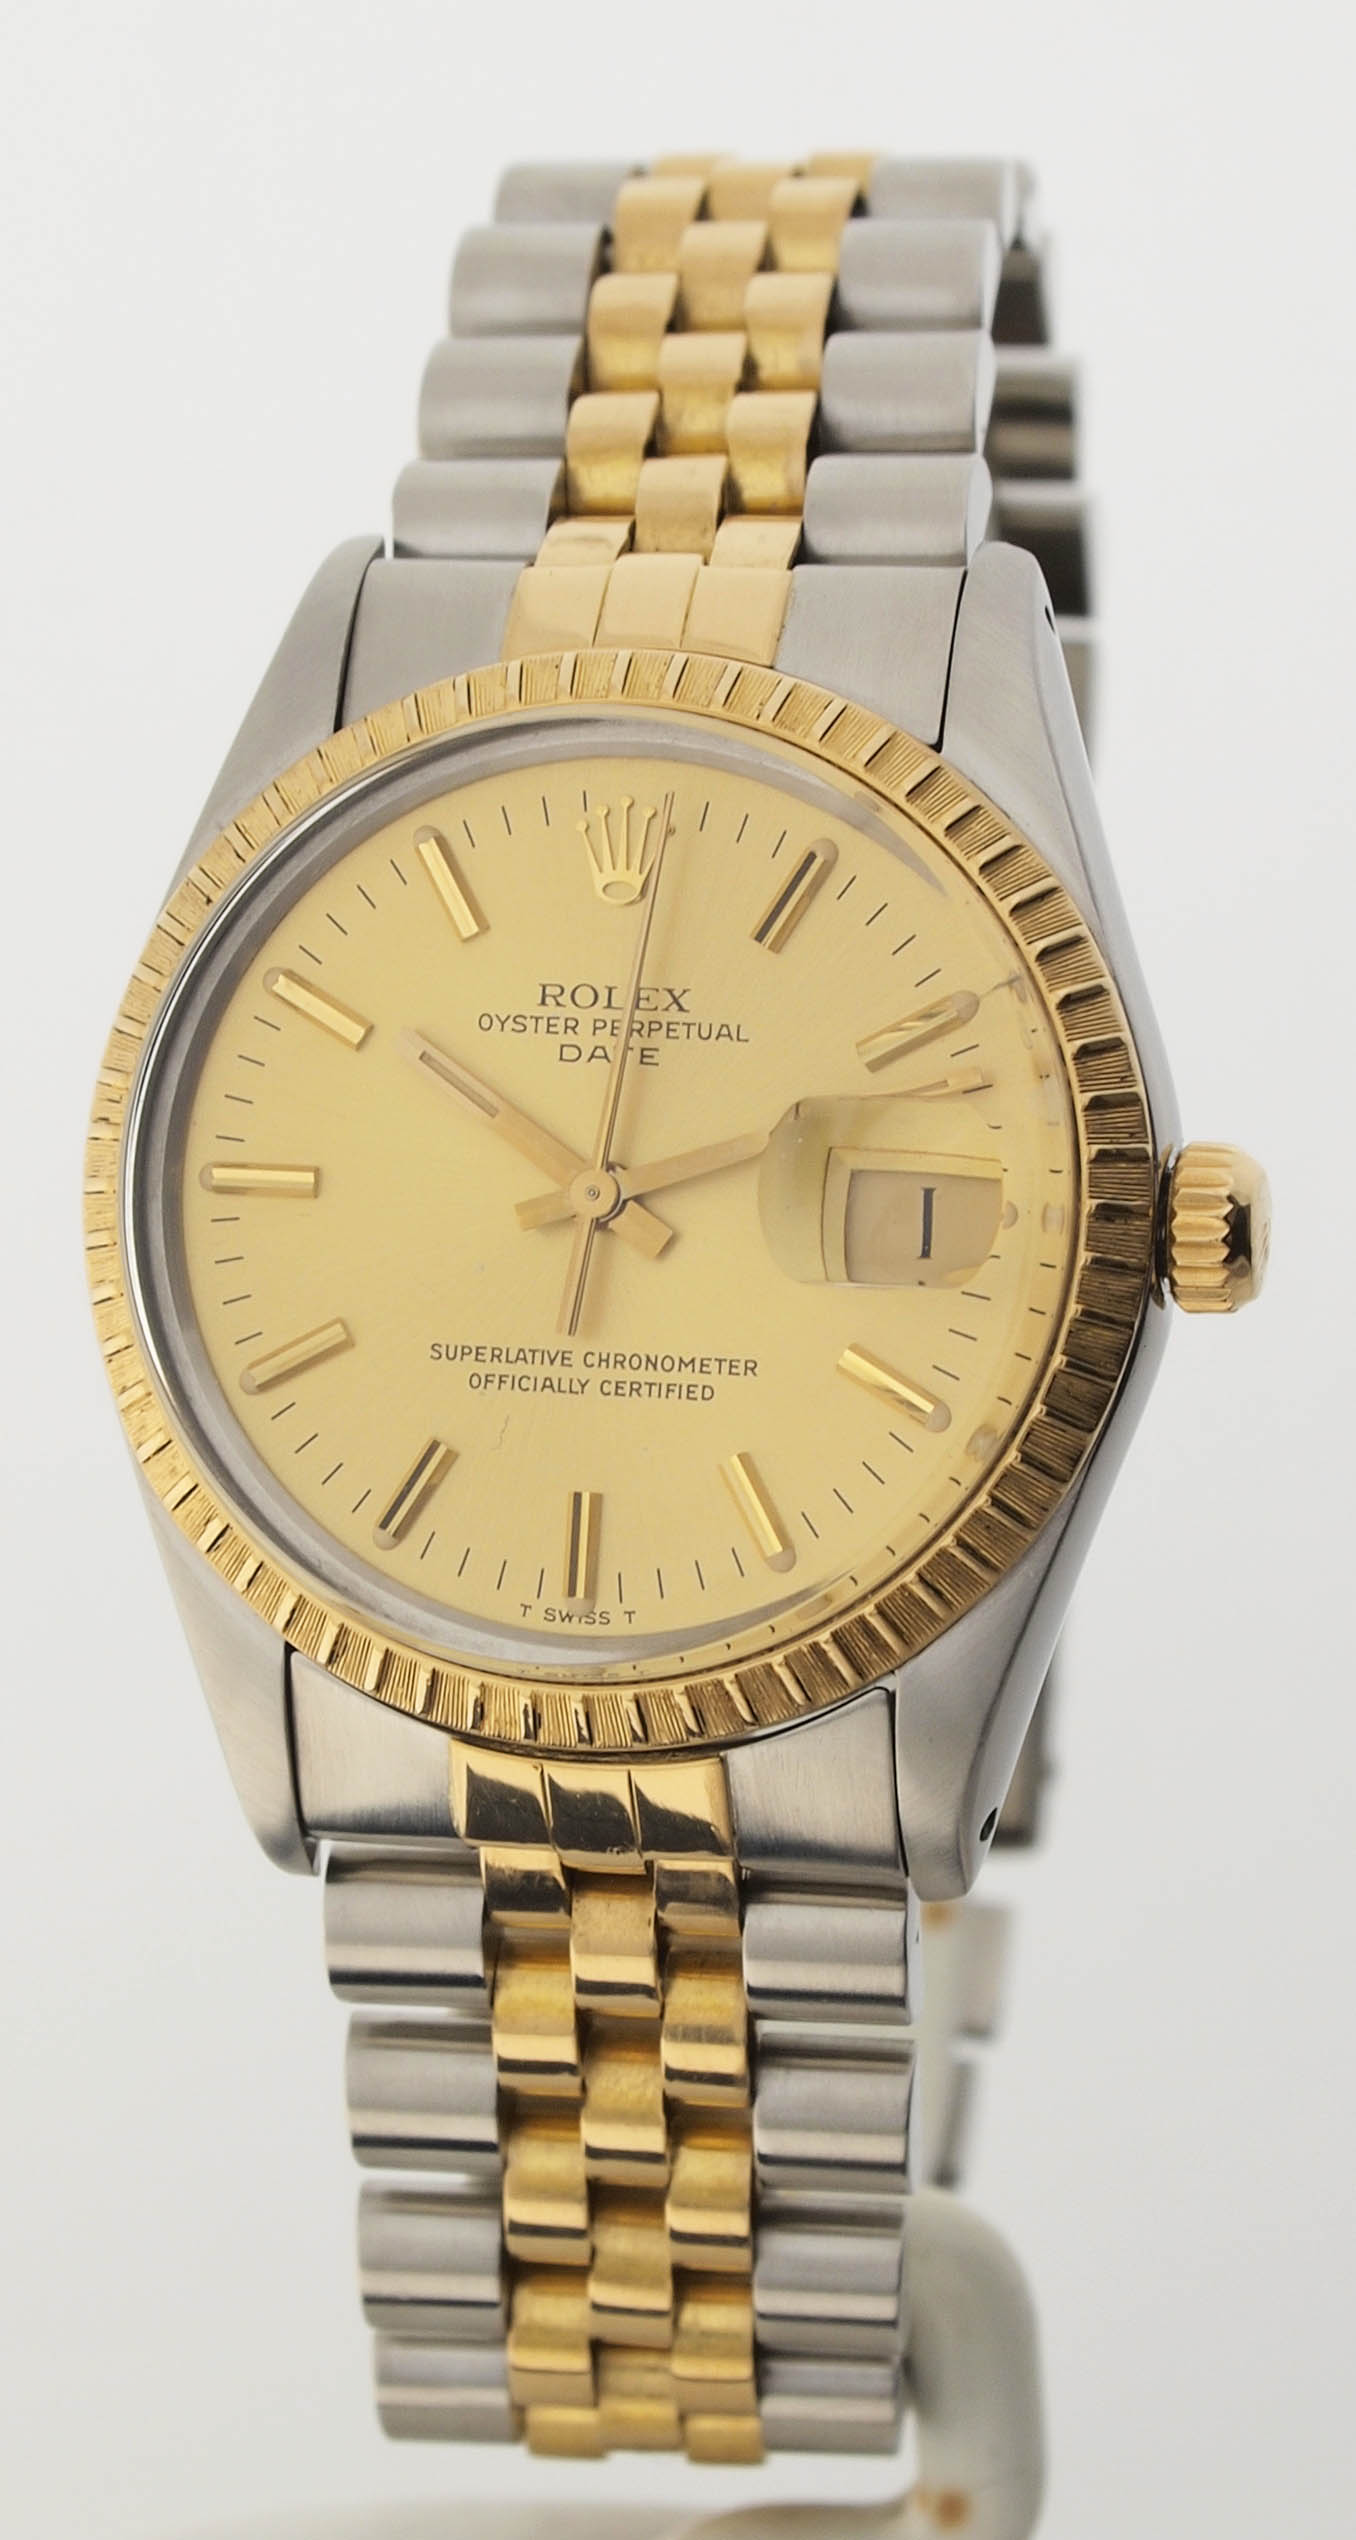 Rolex Oyster Perpetual Superlative Chronometer Officially Certified